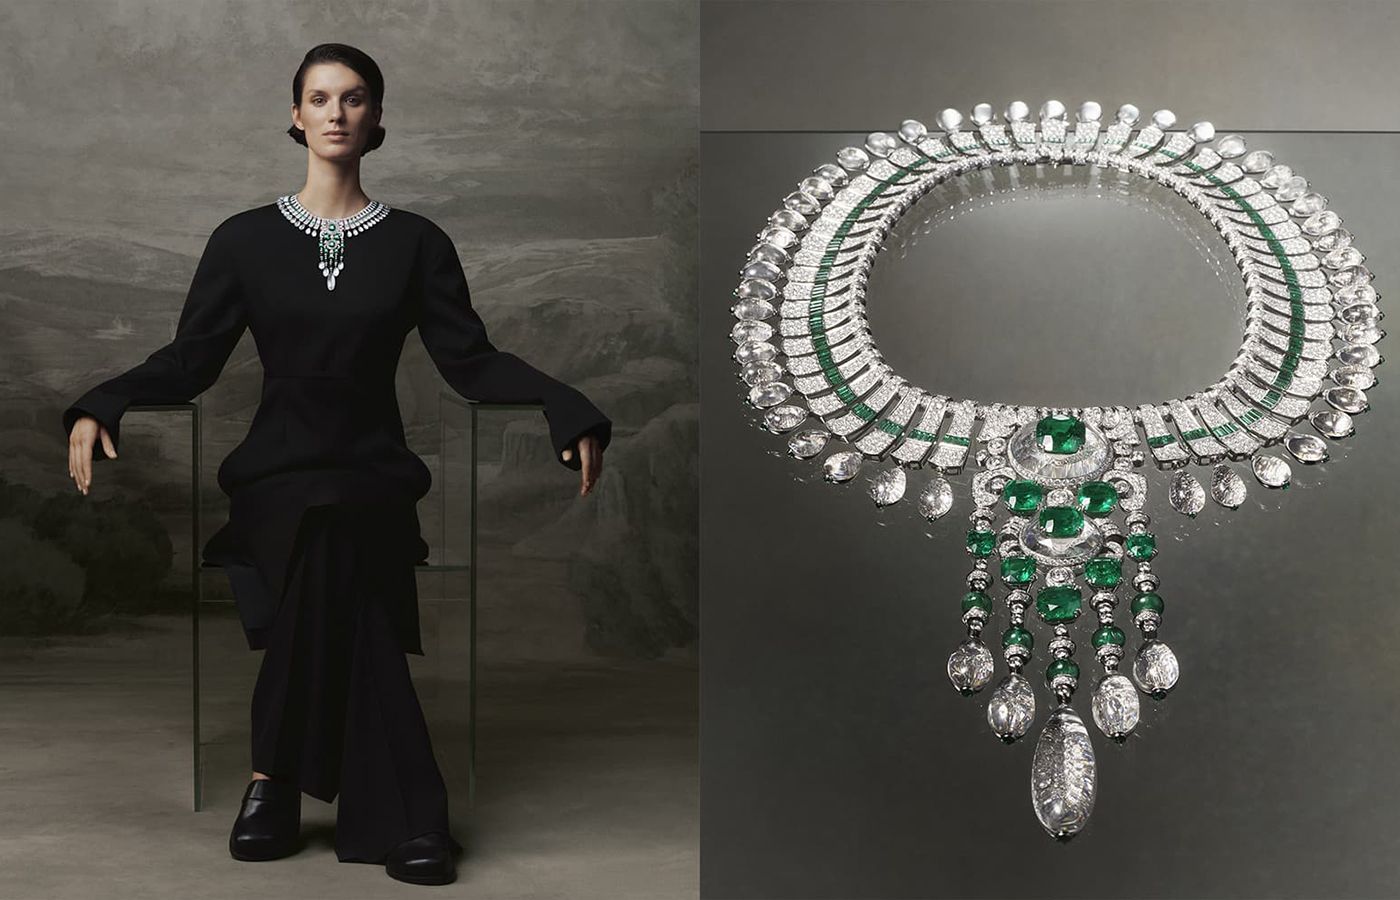 Boucheron New Maharajah Necklace set with nine Colombian cushion-cut emeralds for a total of 38.73 carats, diamonds, rock crystal and emeralds in platinum and white gold from the Histoire de Style New Maharajahs High Jewellery Collection